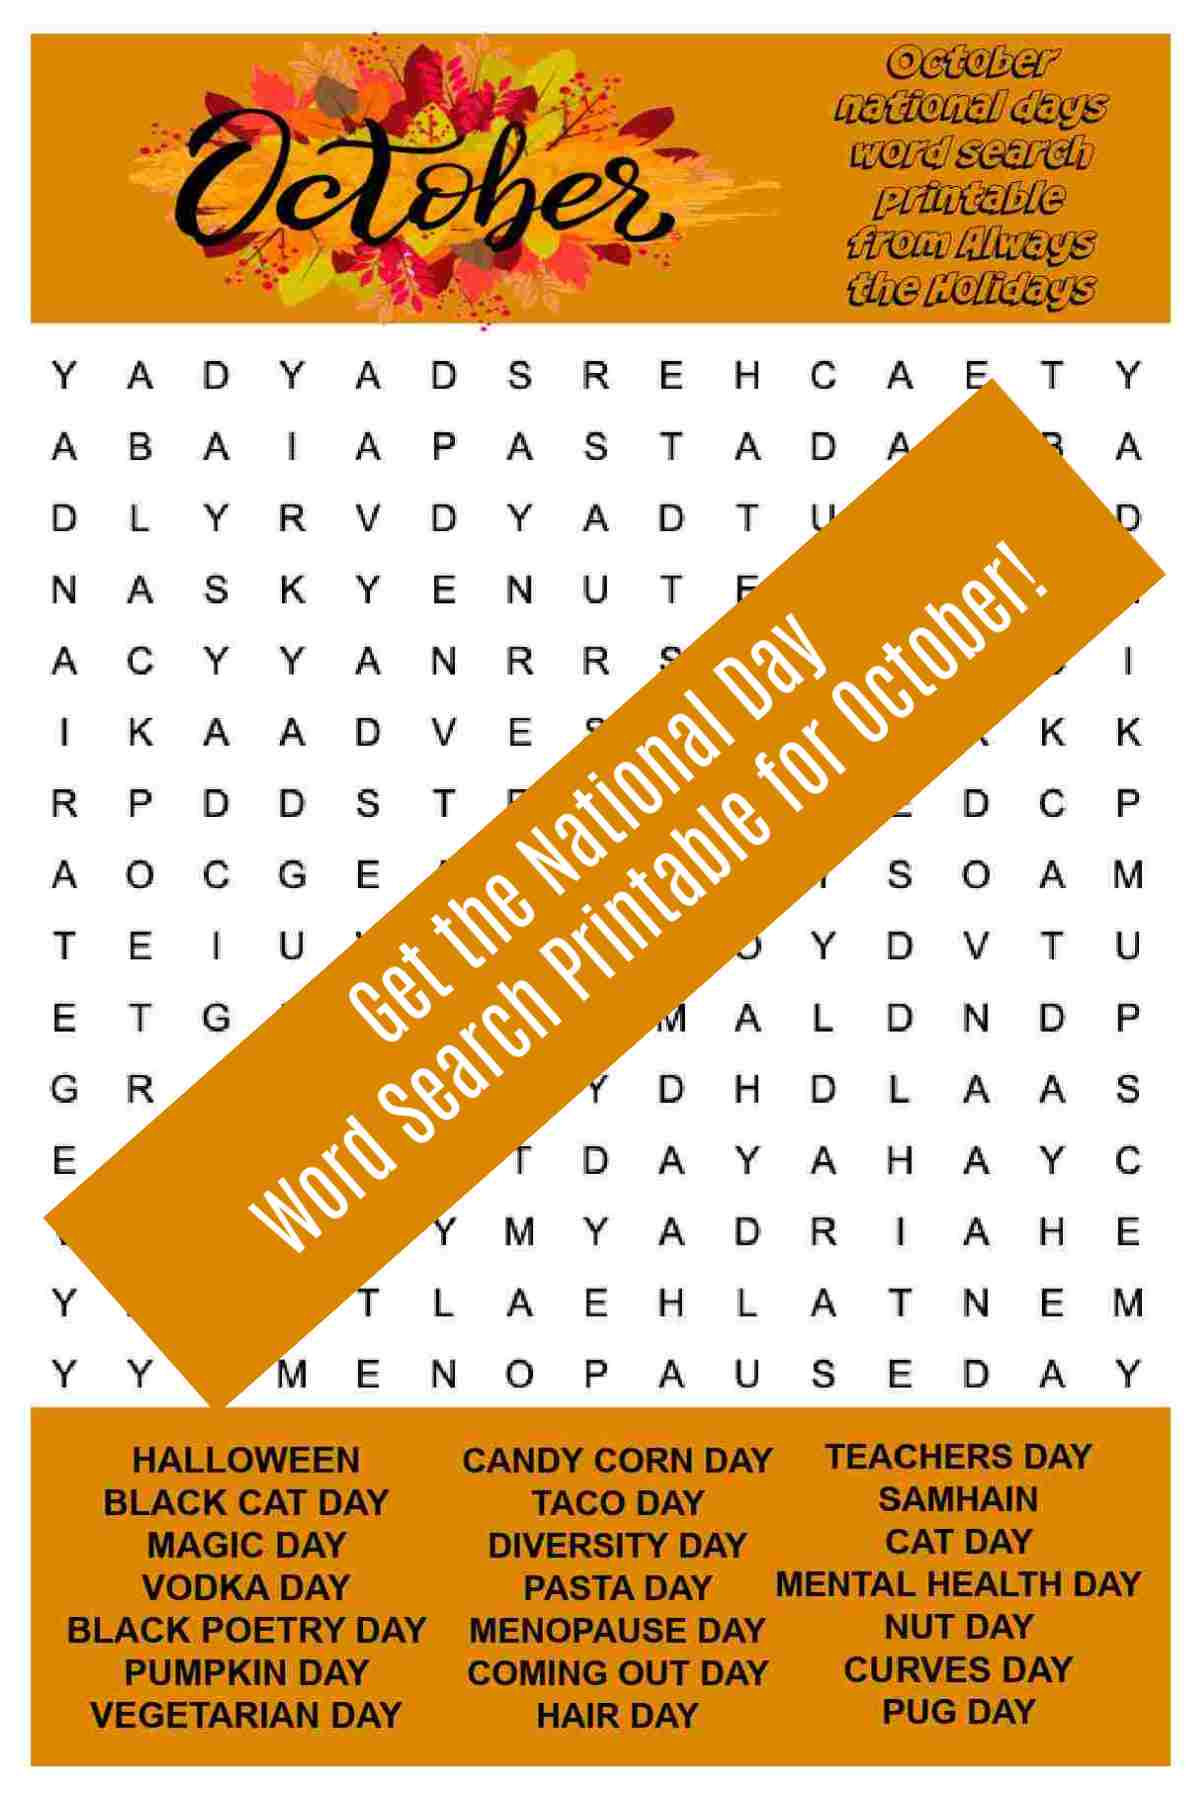 Word find puzzle with orange banner and words reading Get the National Day word search printable for October.